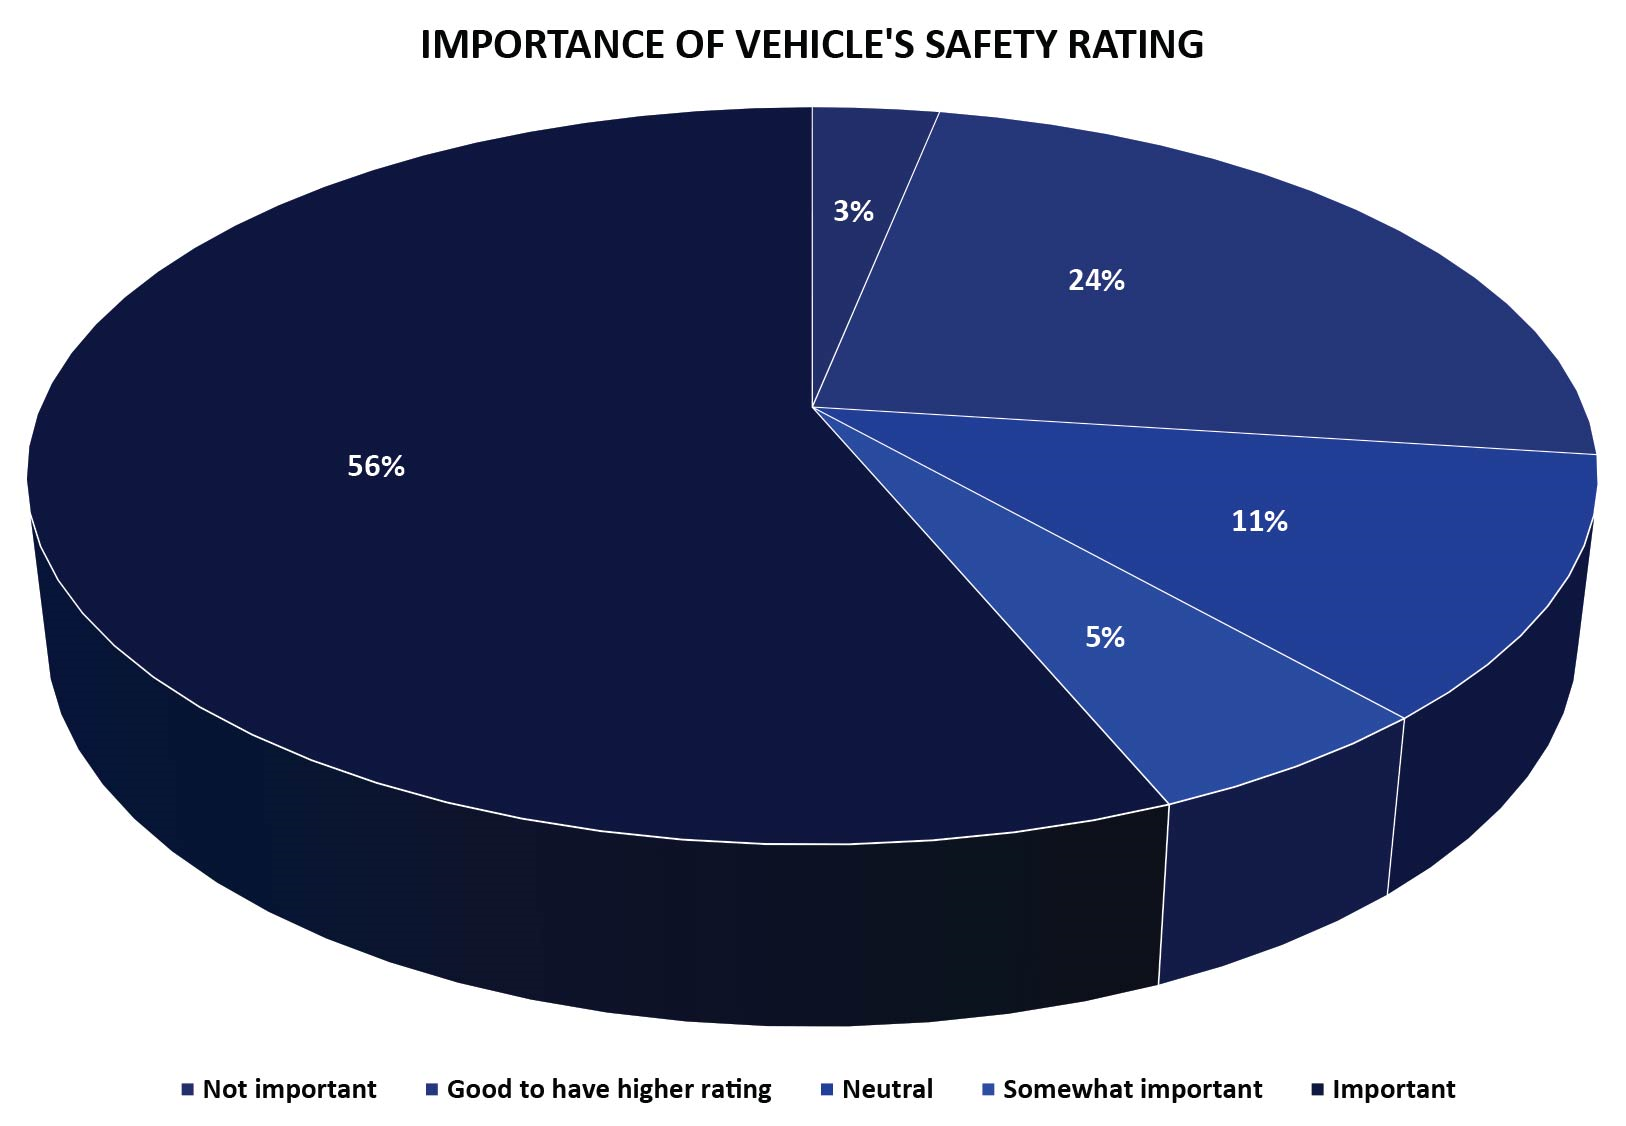 Importance of Vehicle Safety Rating in Brazil